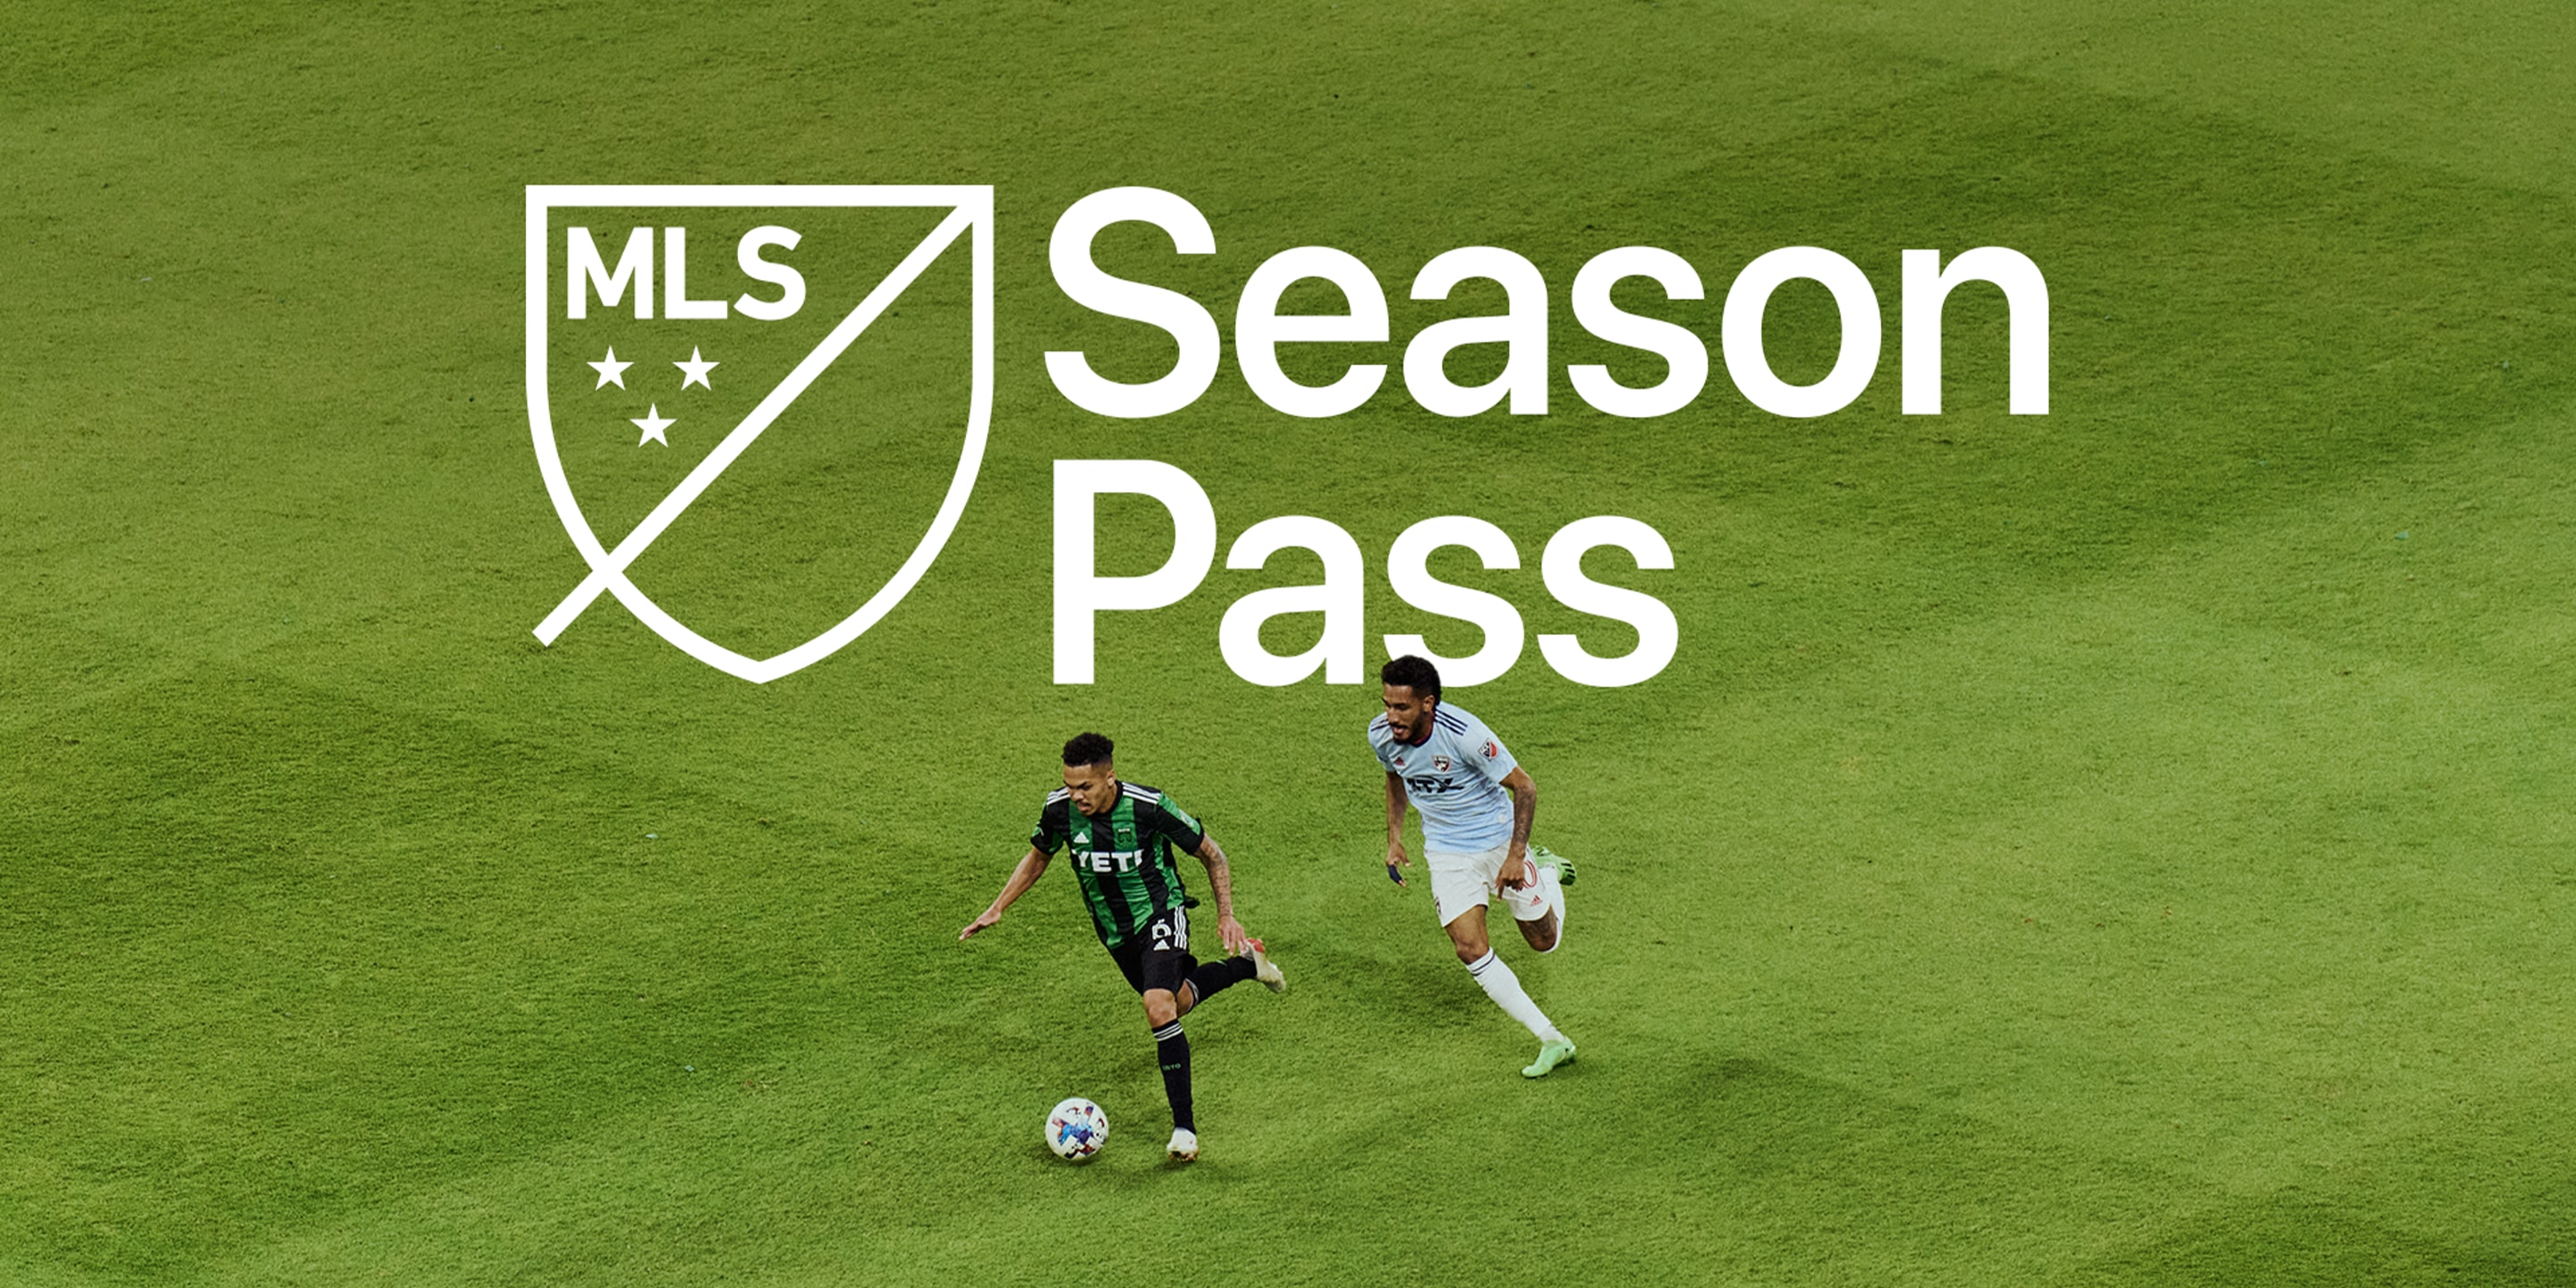 How to watch all MLS games with MLS Season Pass